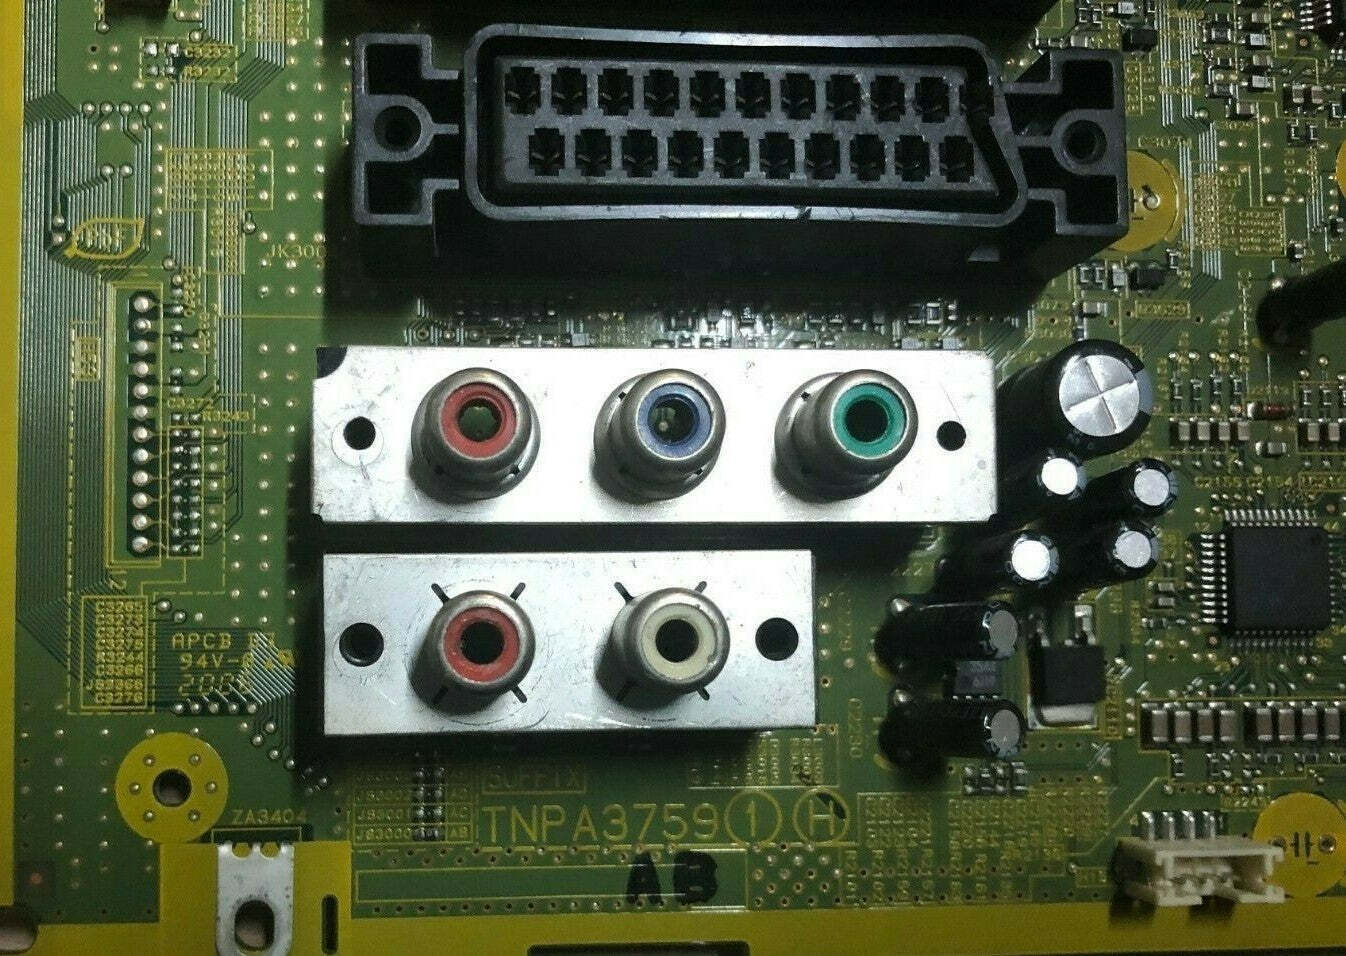 TNPA3759 mainboard - for parts only